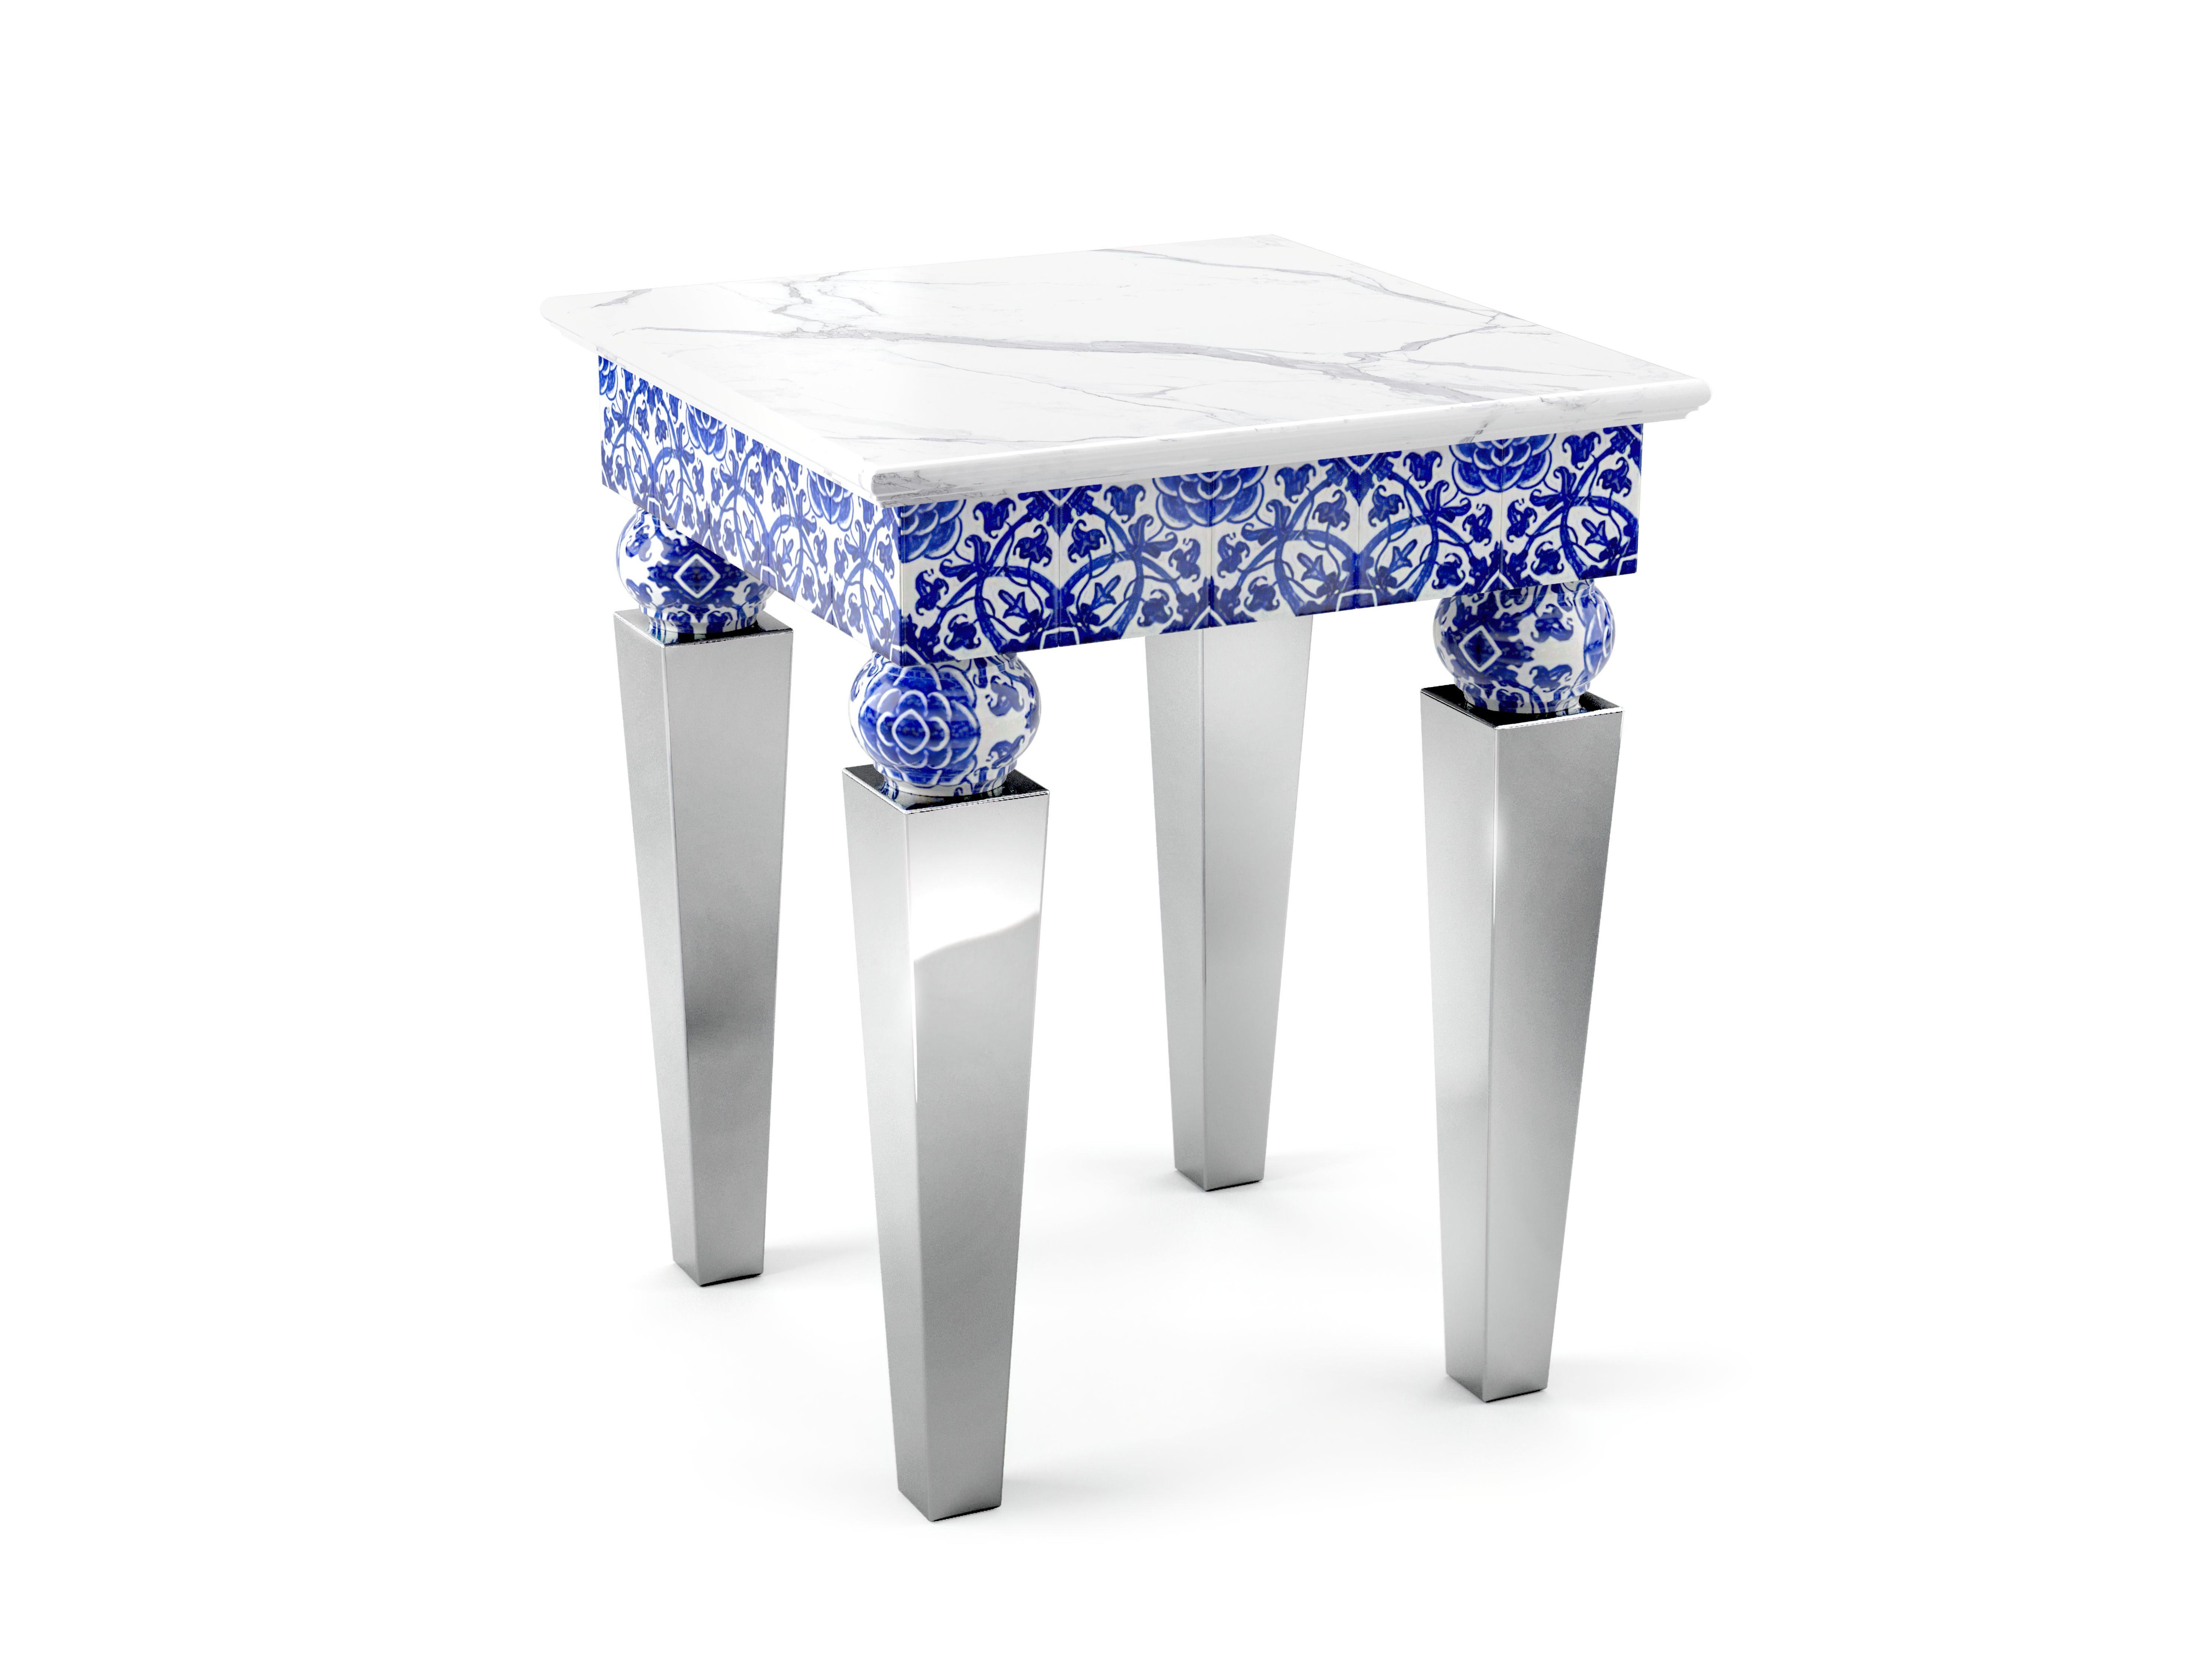 Two Side Tables, White Marble, Mirror Steel, Blue Majolica Tiles, Also Outdoor In New Condition For Sale In Recanati, IT